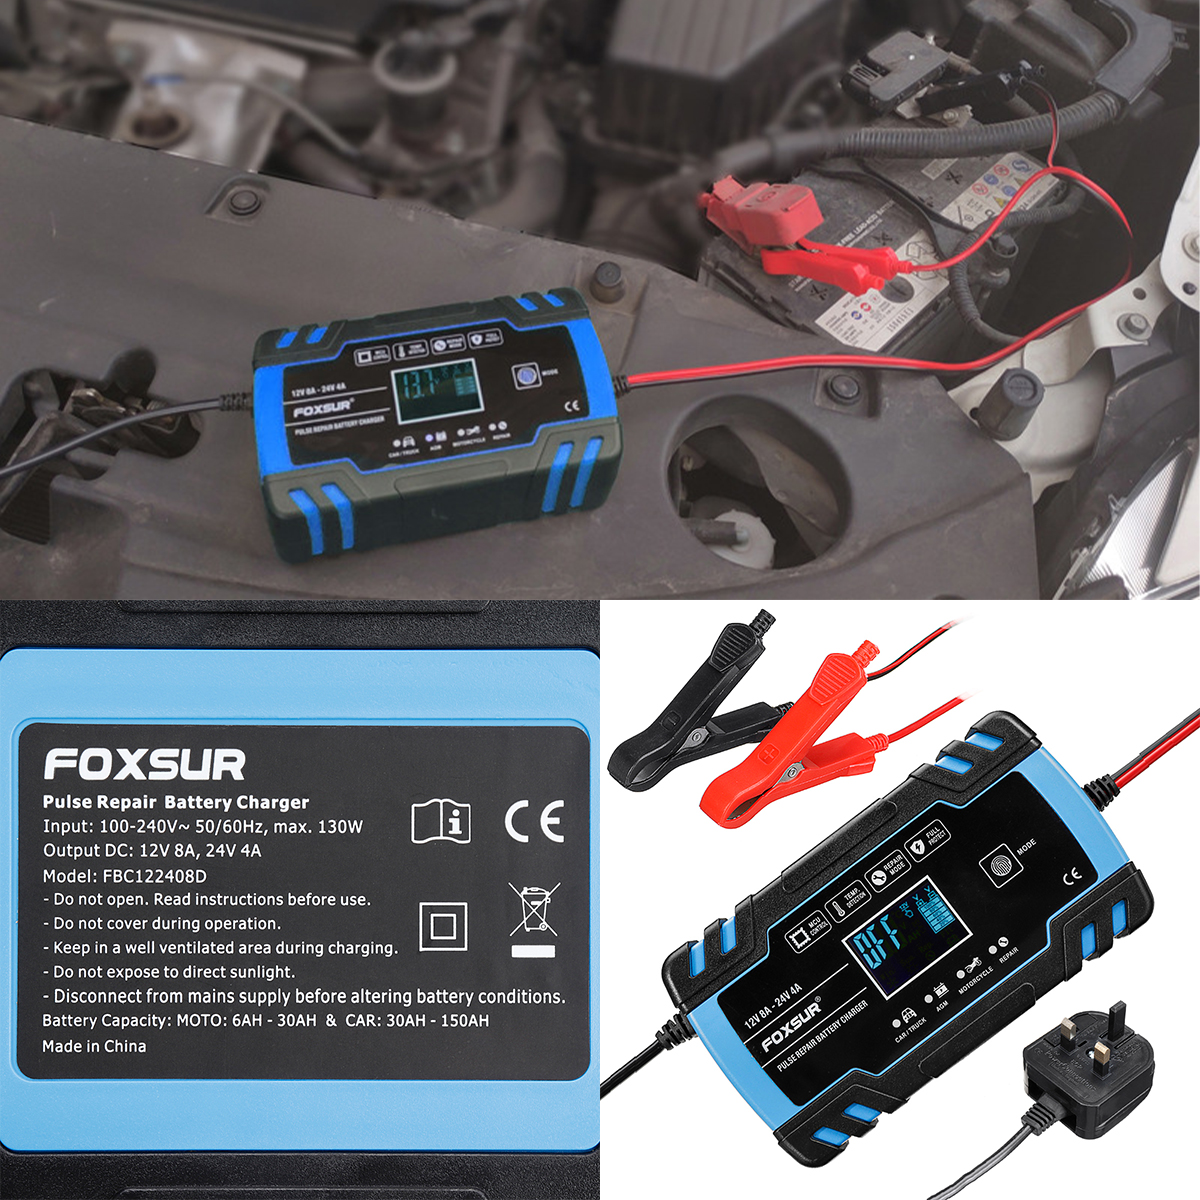 Display-Battery-Charger-12V-8A24V-4A-Automotive-Smart-Battery-Maintainer-for-Car-Truck-Motorcycle-Mu-1621856-4